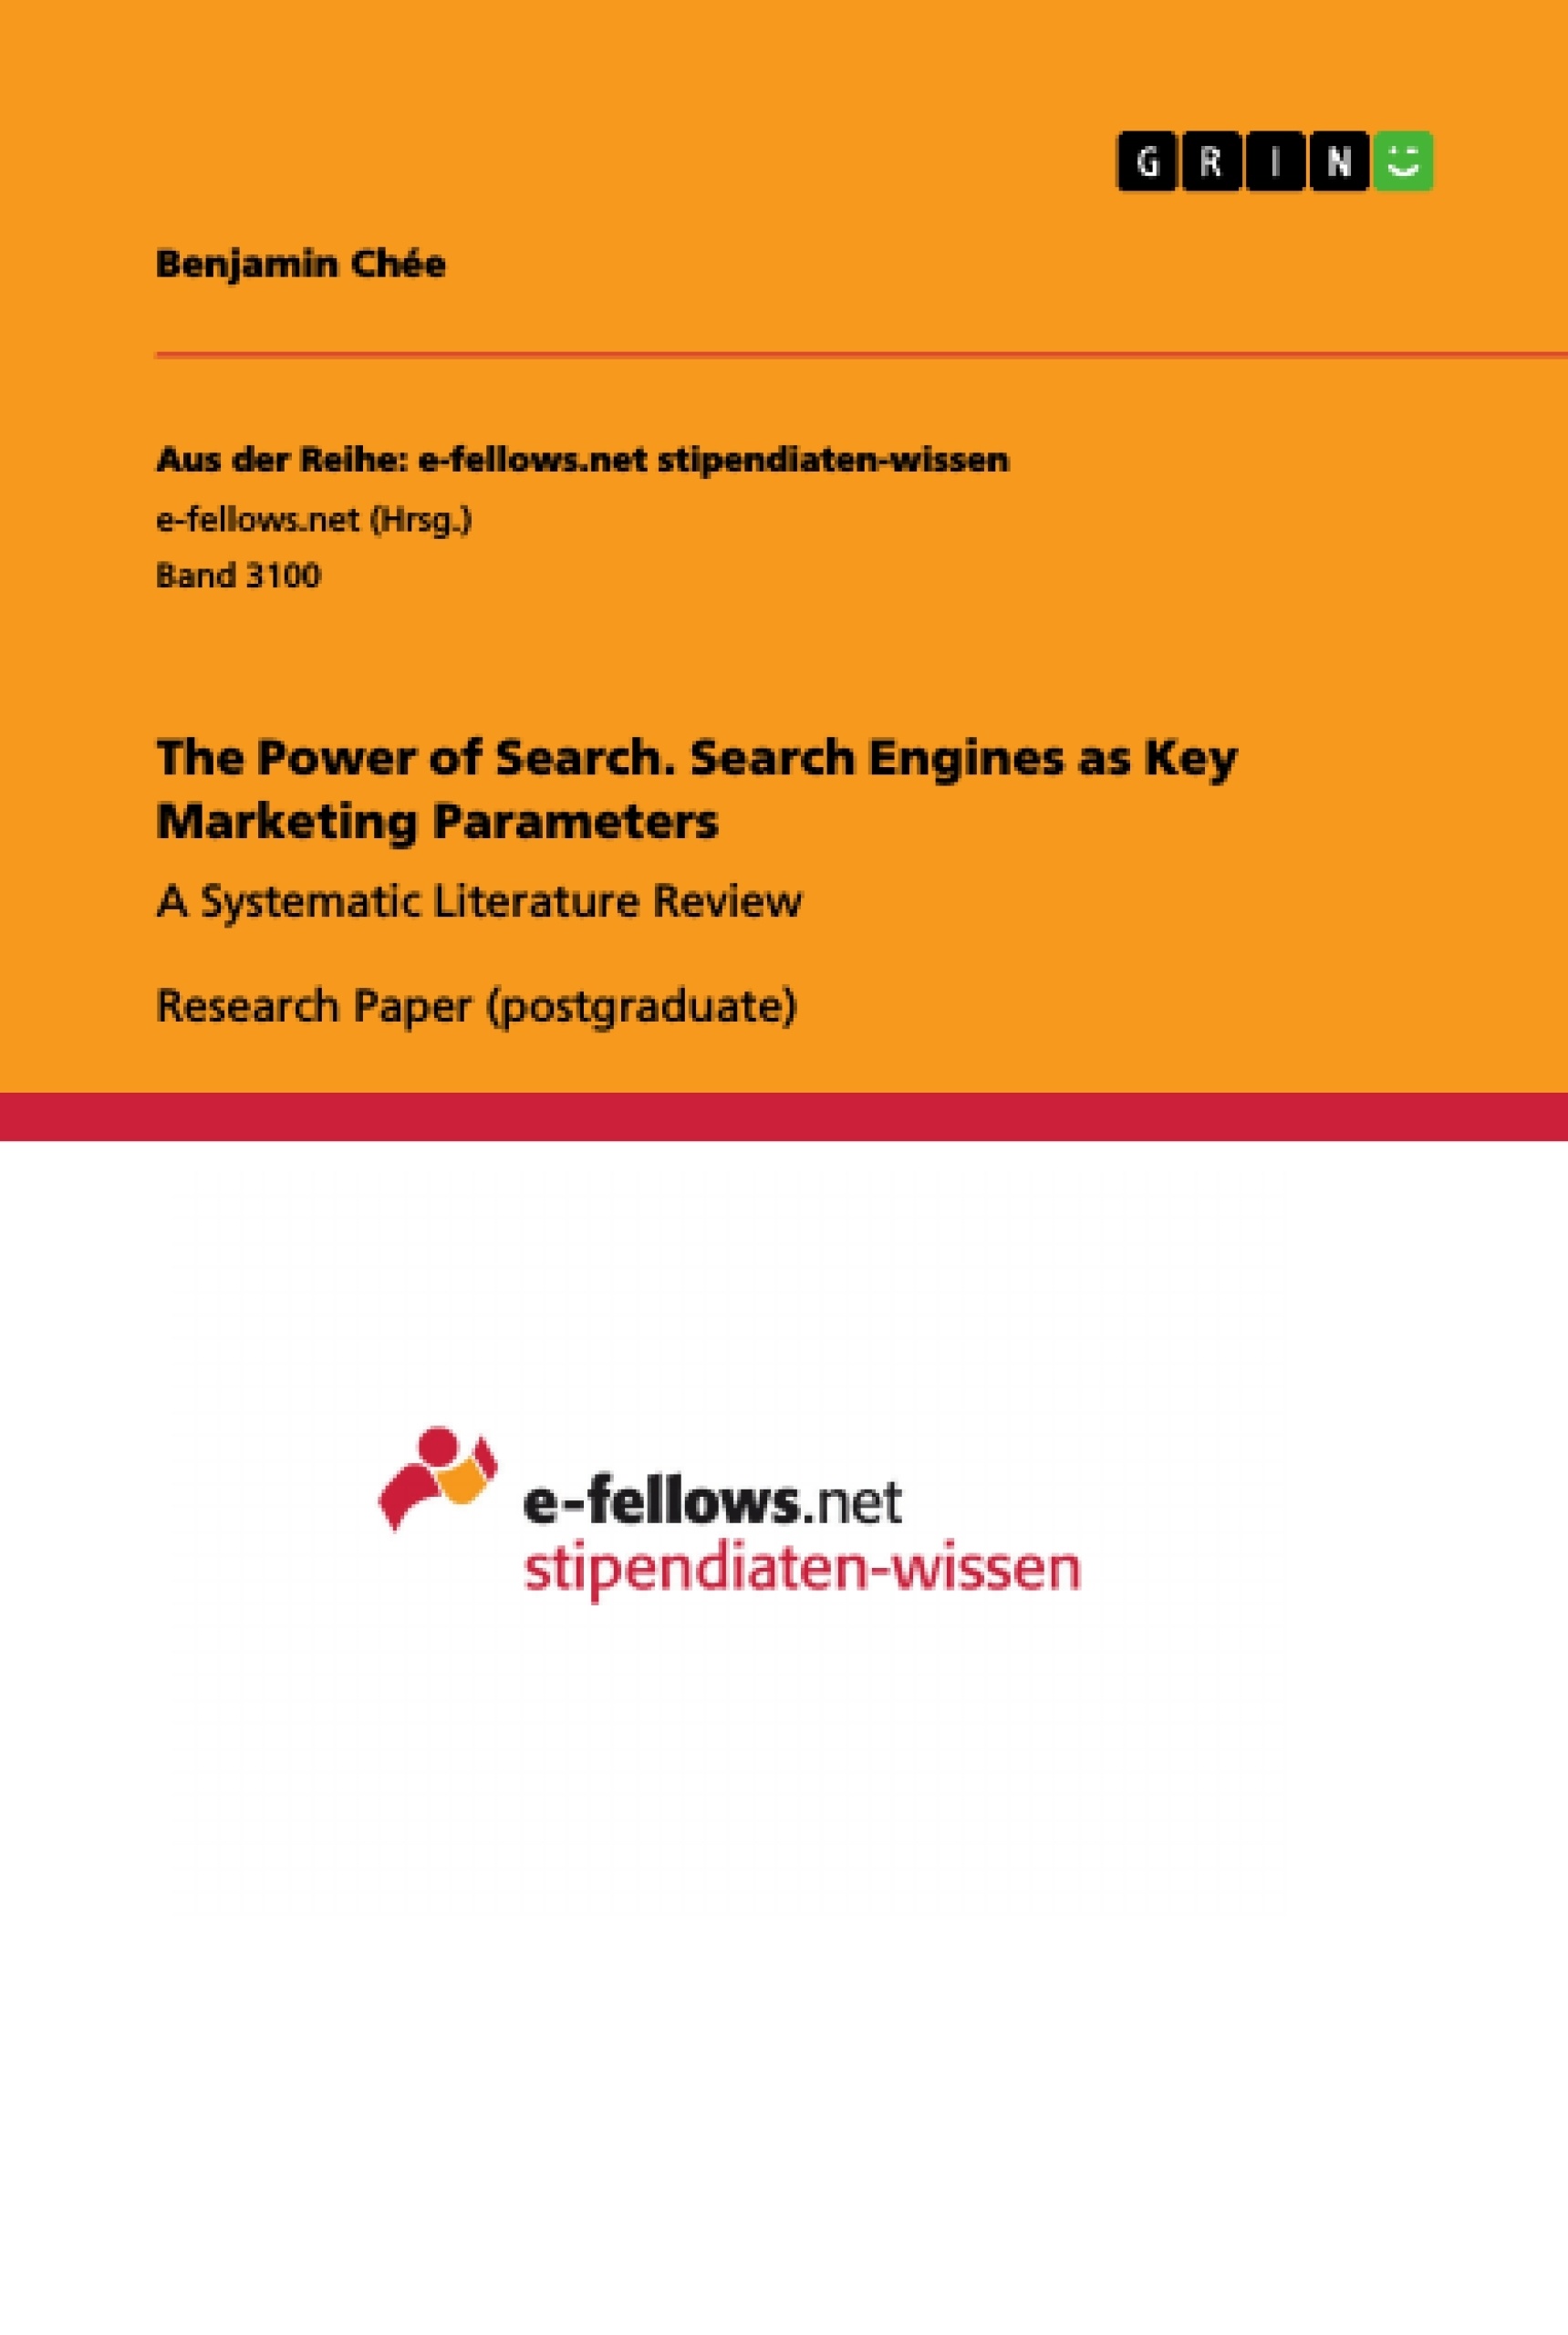 Title: The Power of Search. Search Engines as Key Marketing Parameters